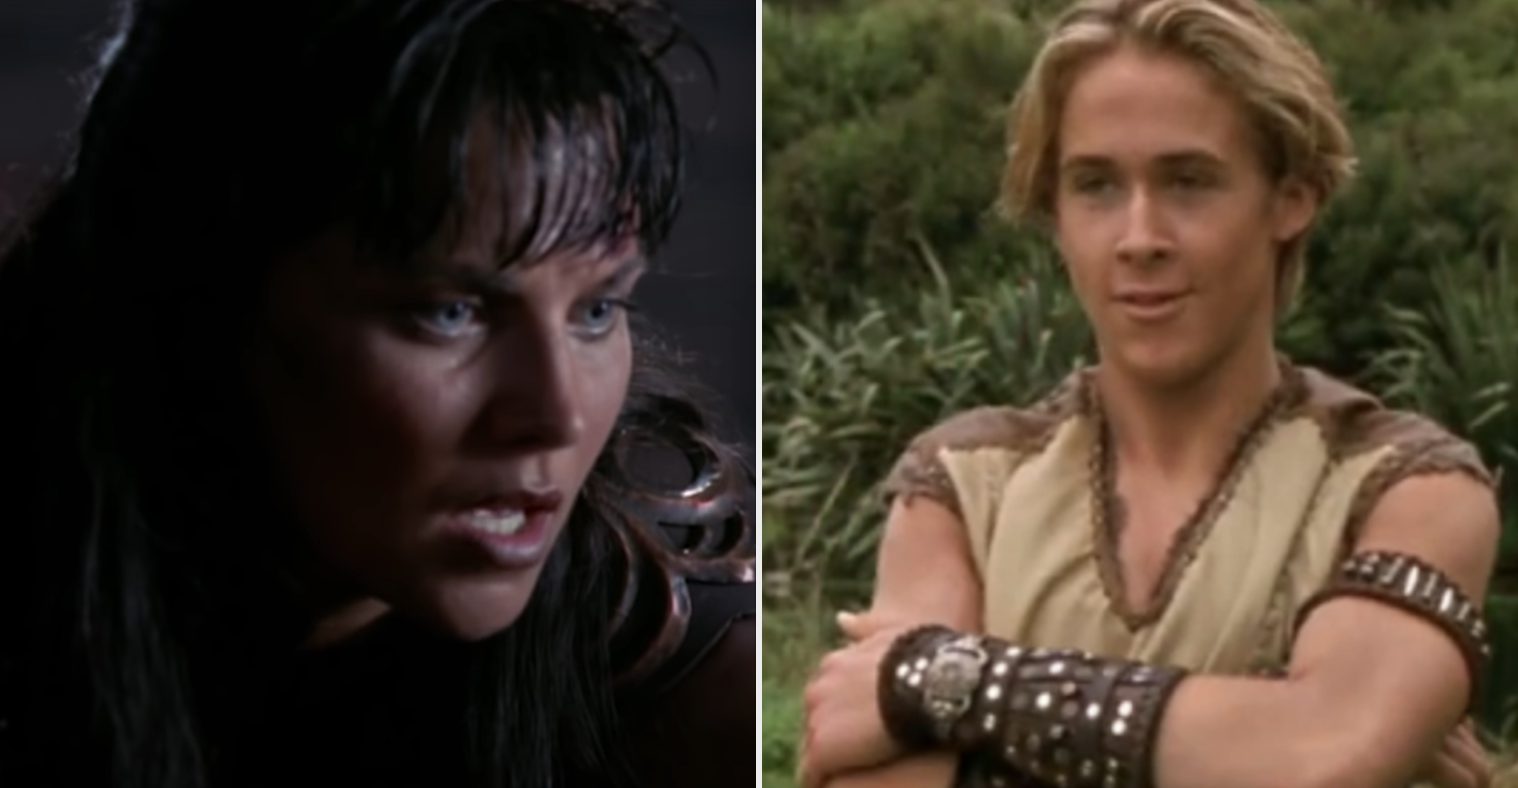 Lucy Lawless as Xena and Ryan Gosling as a young Hercules